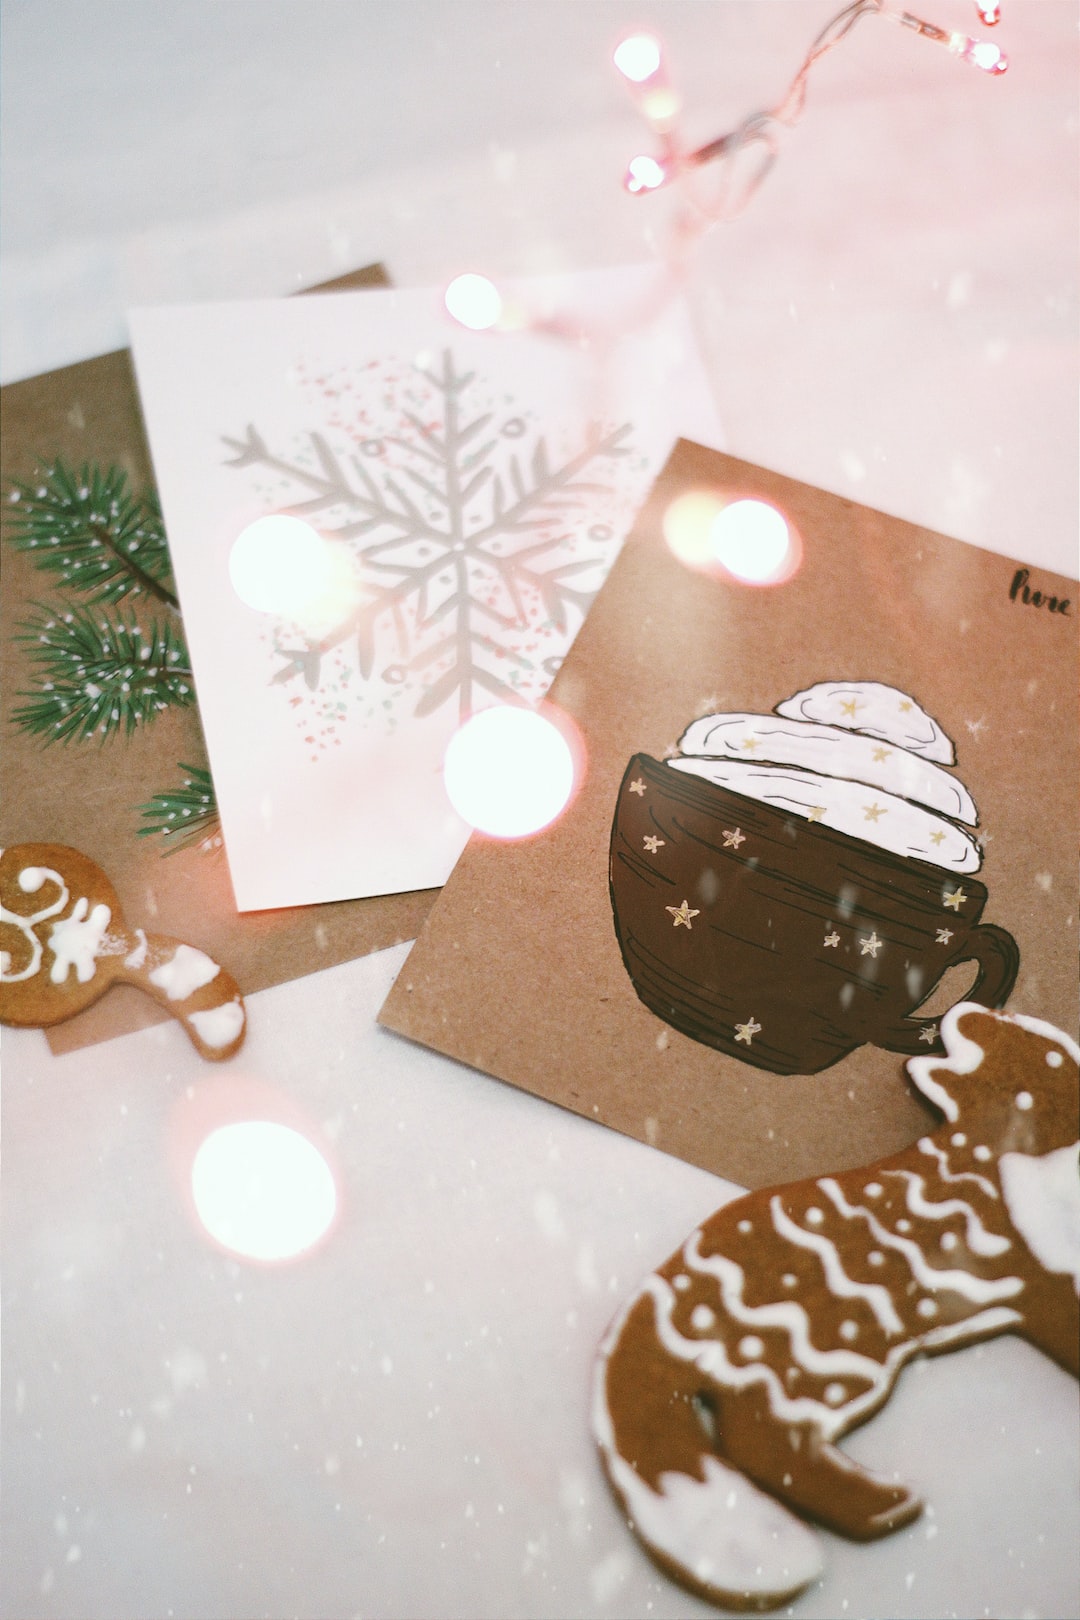 Innovative Ways to Display Christmas Cards: Making Your Holiday Season Extra Special